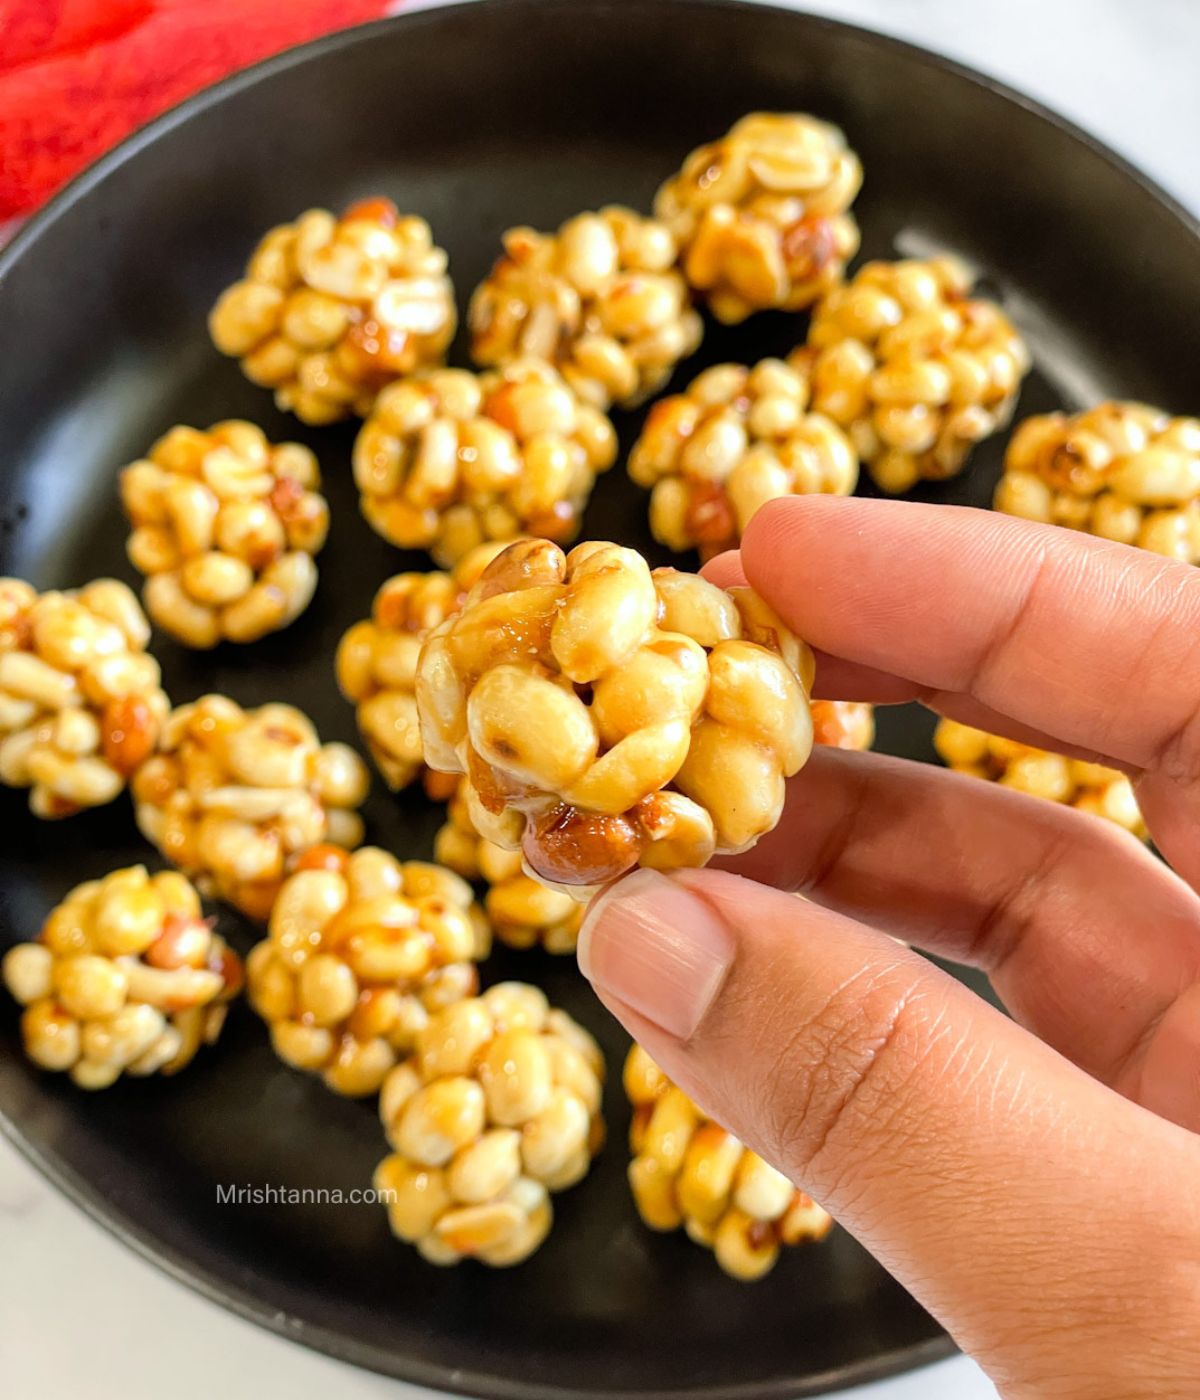 A peanut jaggery ladoo is held in a hand.